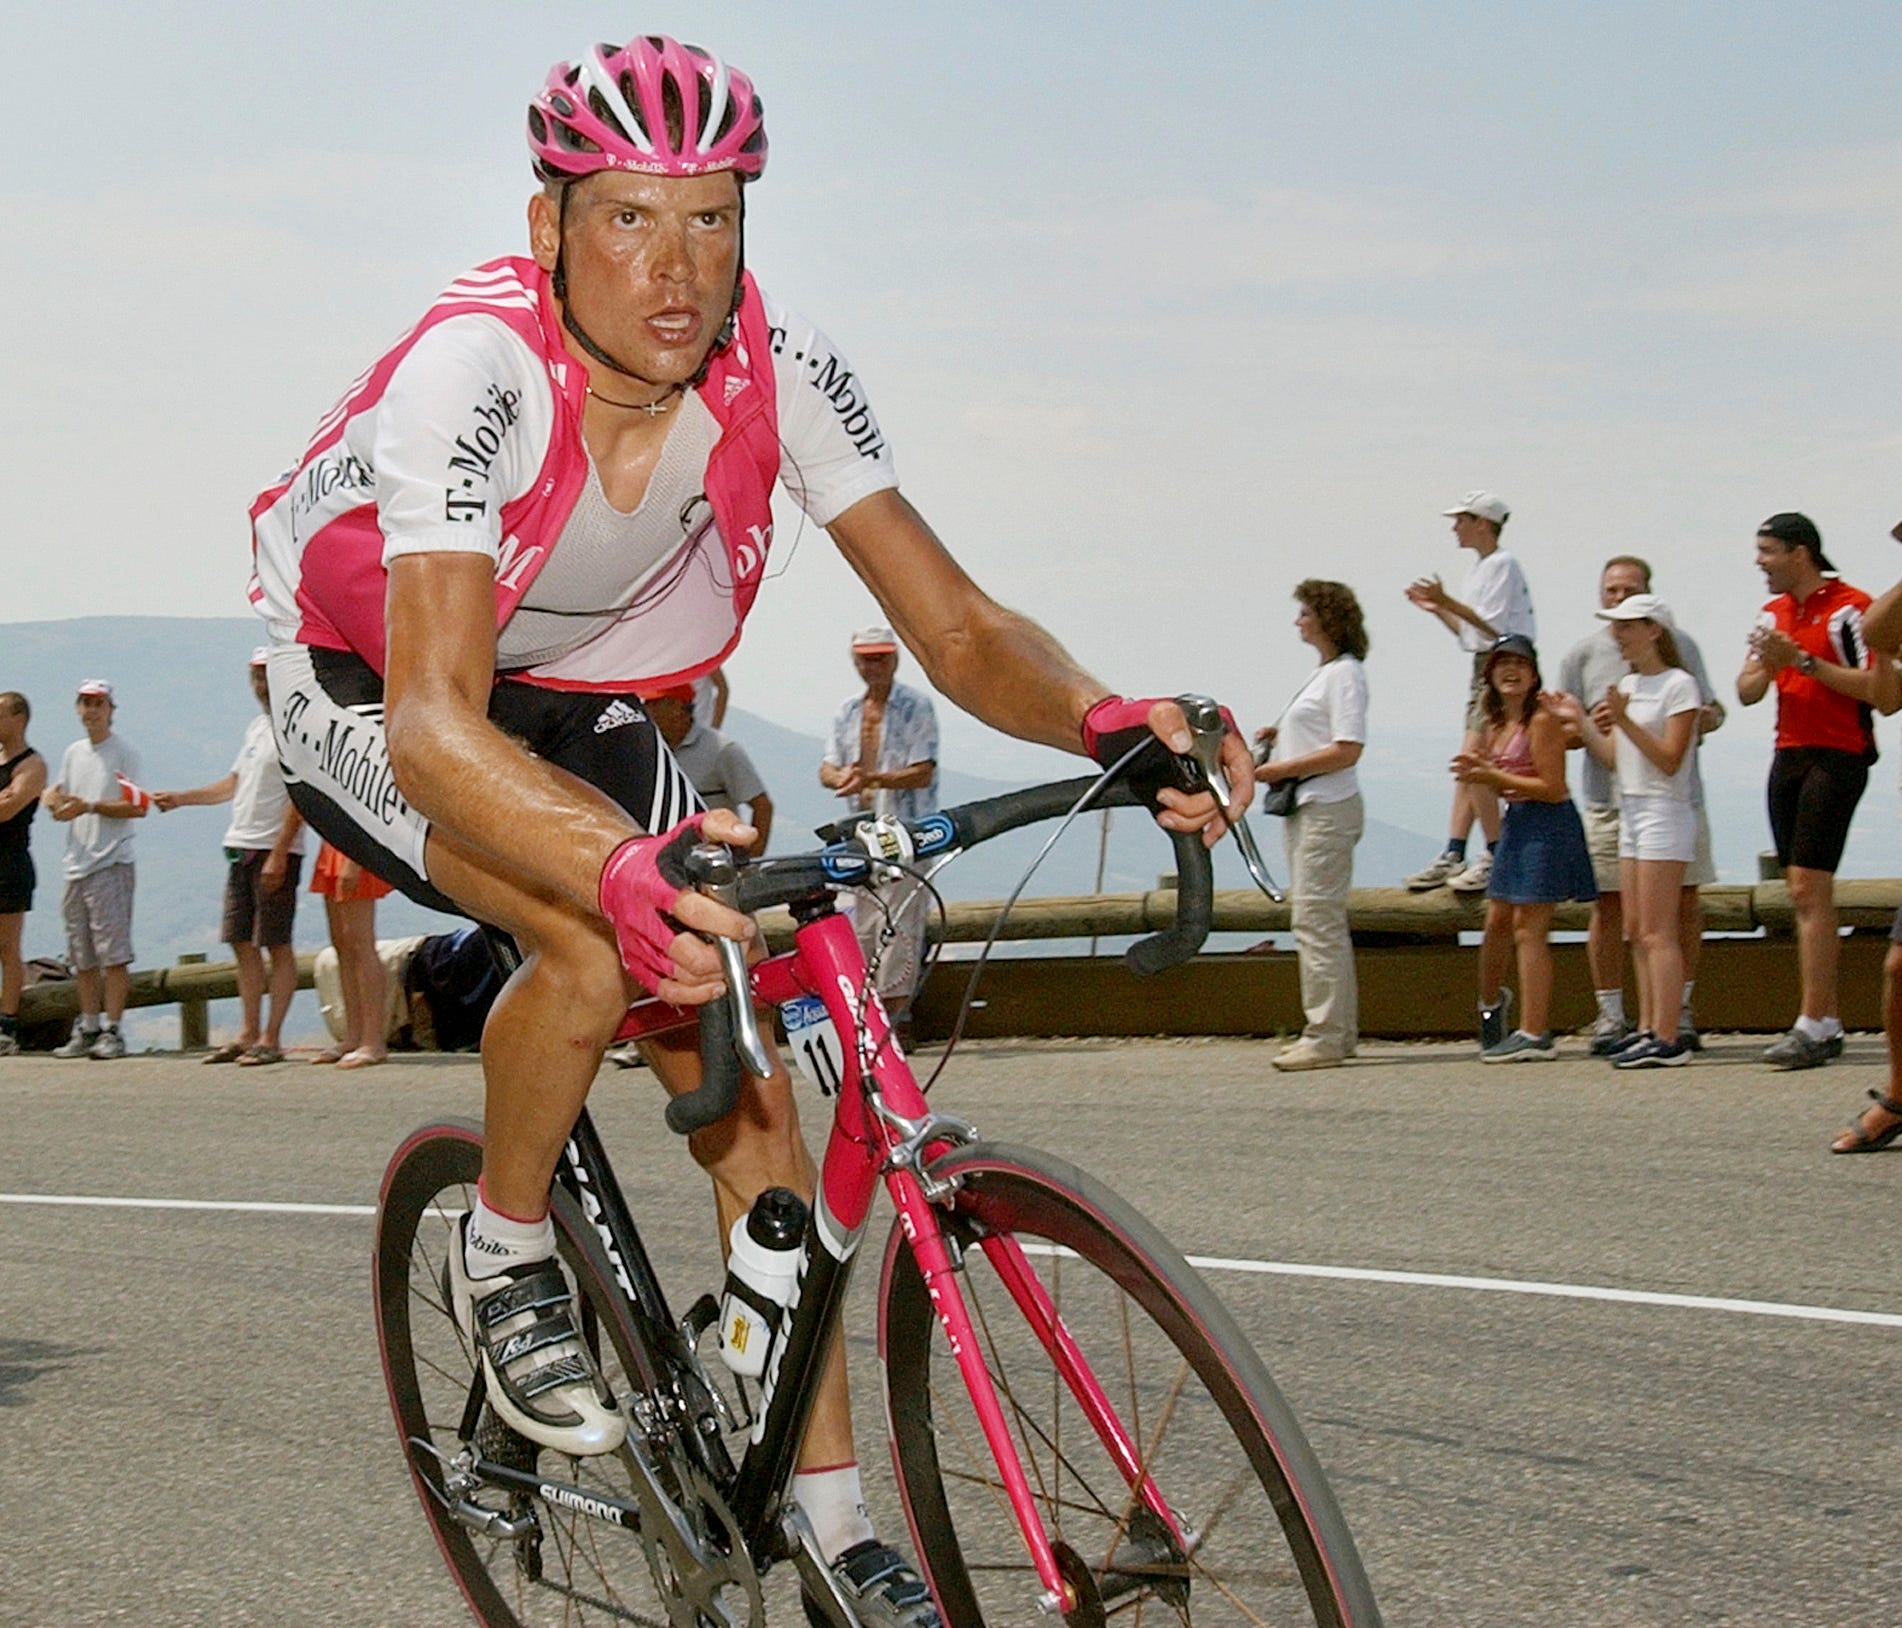 FILE - In this July 20, 2004 file photo T-Mobile team leader Jan Ullrich of Germany pedals during his attack in the ascent of the Echarasson pass during the 15th stage of the Tour de France cycling race between Valreas, southern France, and Villard-d